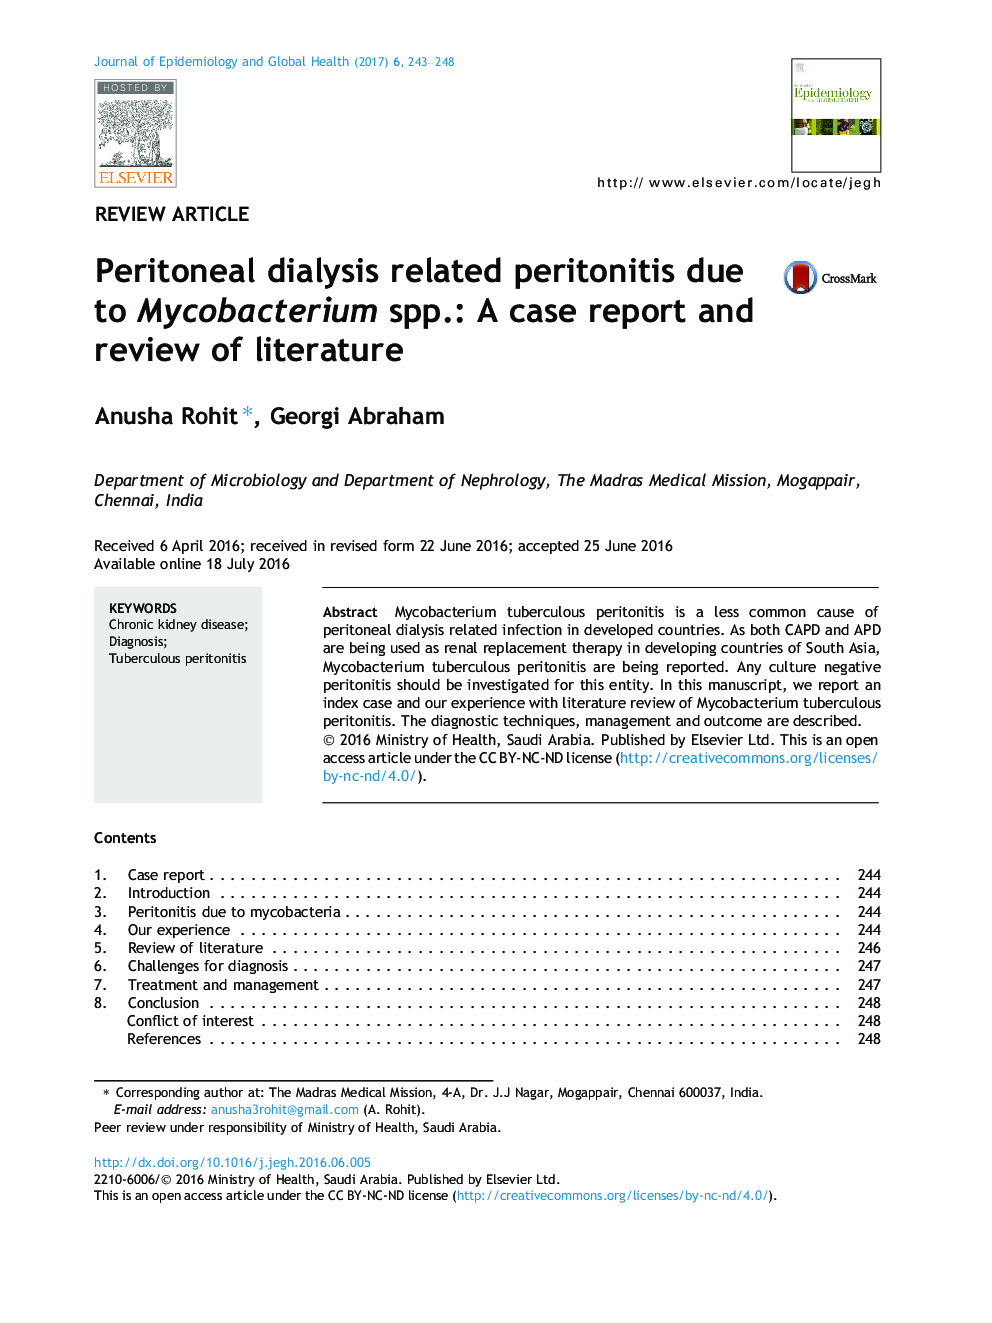 Peritoneal dialysis related peritonitis due to Mycobacterium spp.: A case report and review of literature